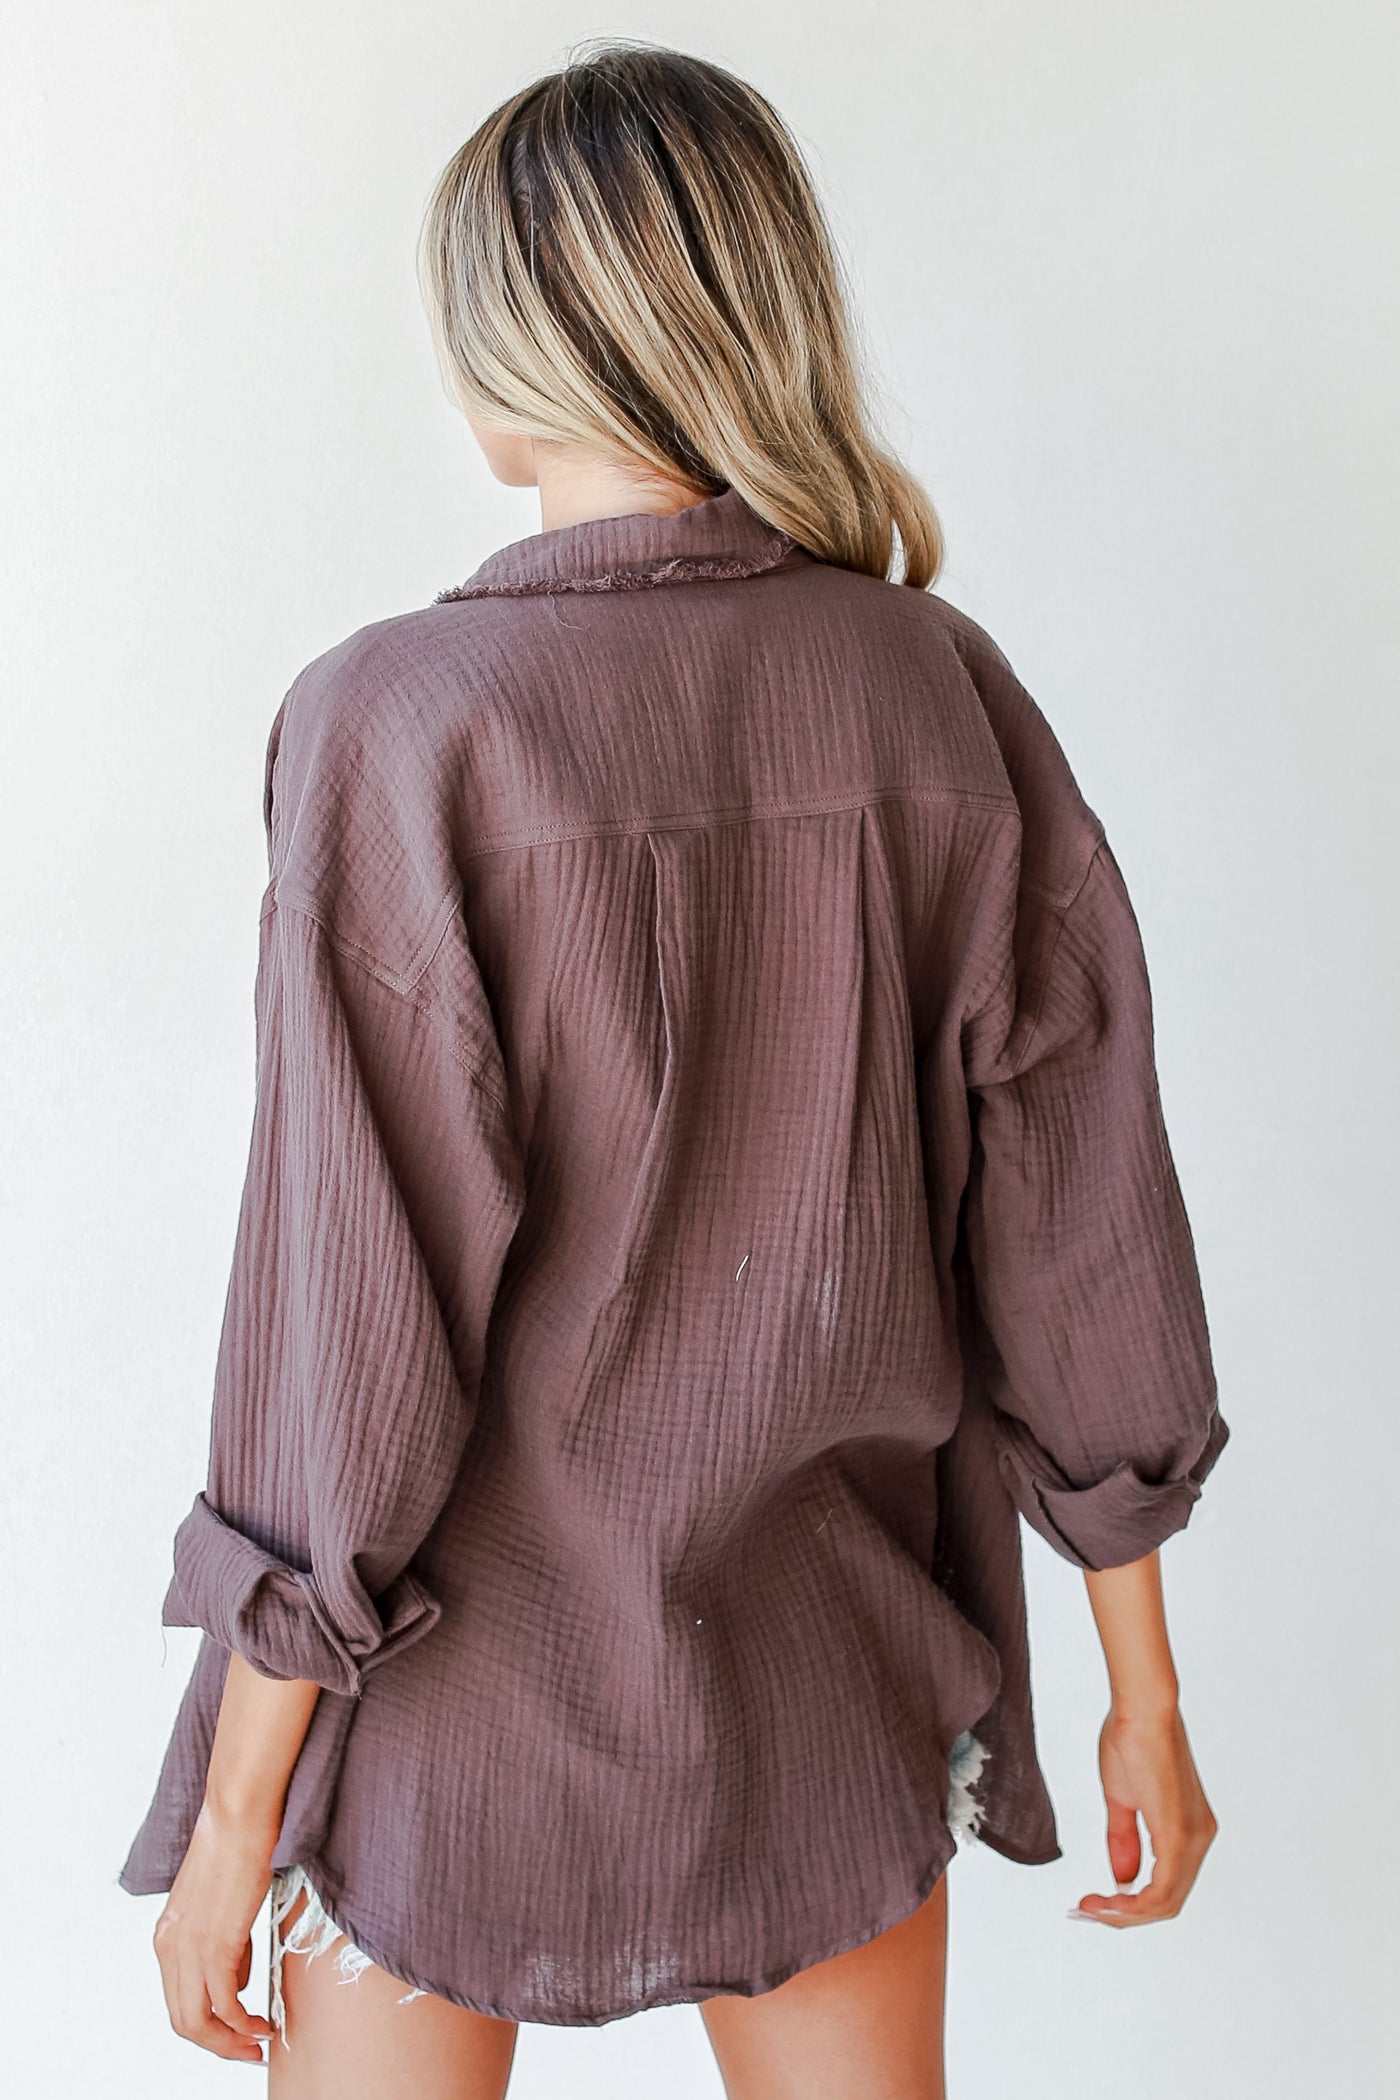 Linen Blouse in charcoal back view